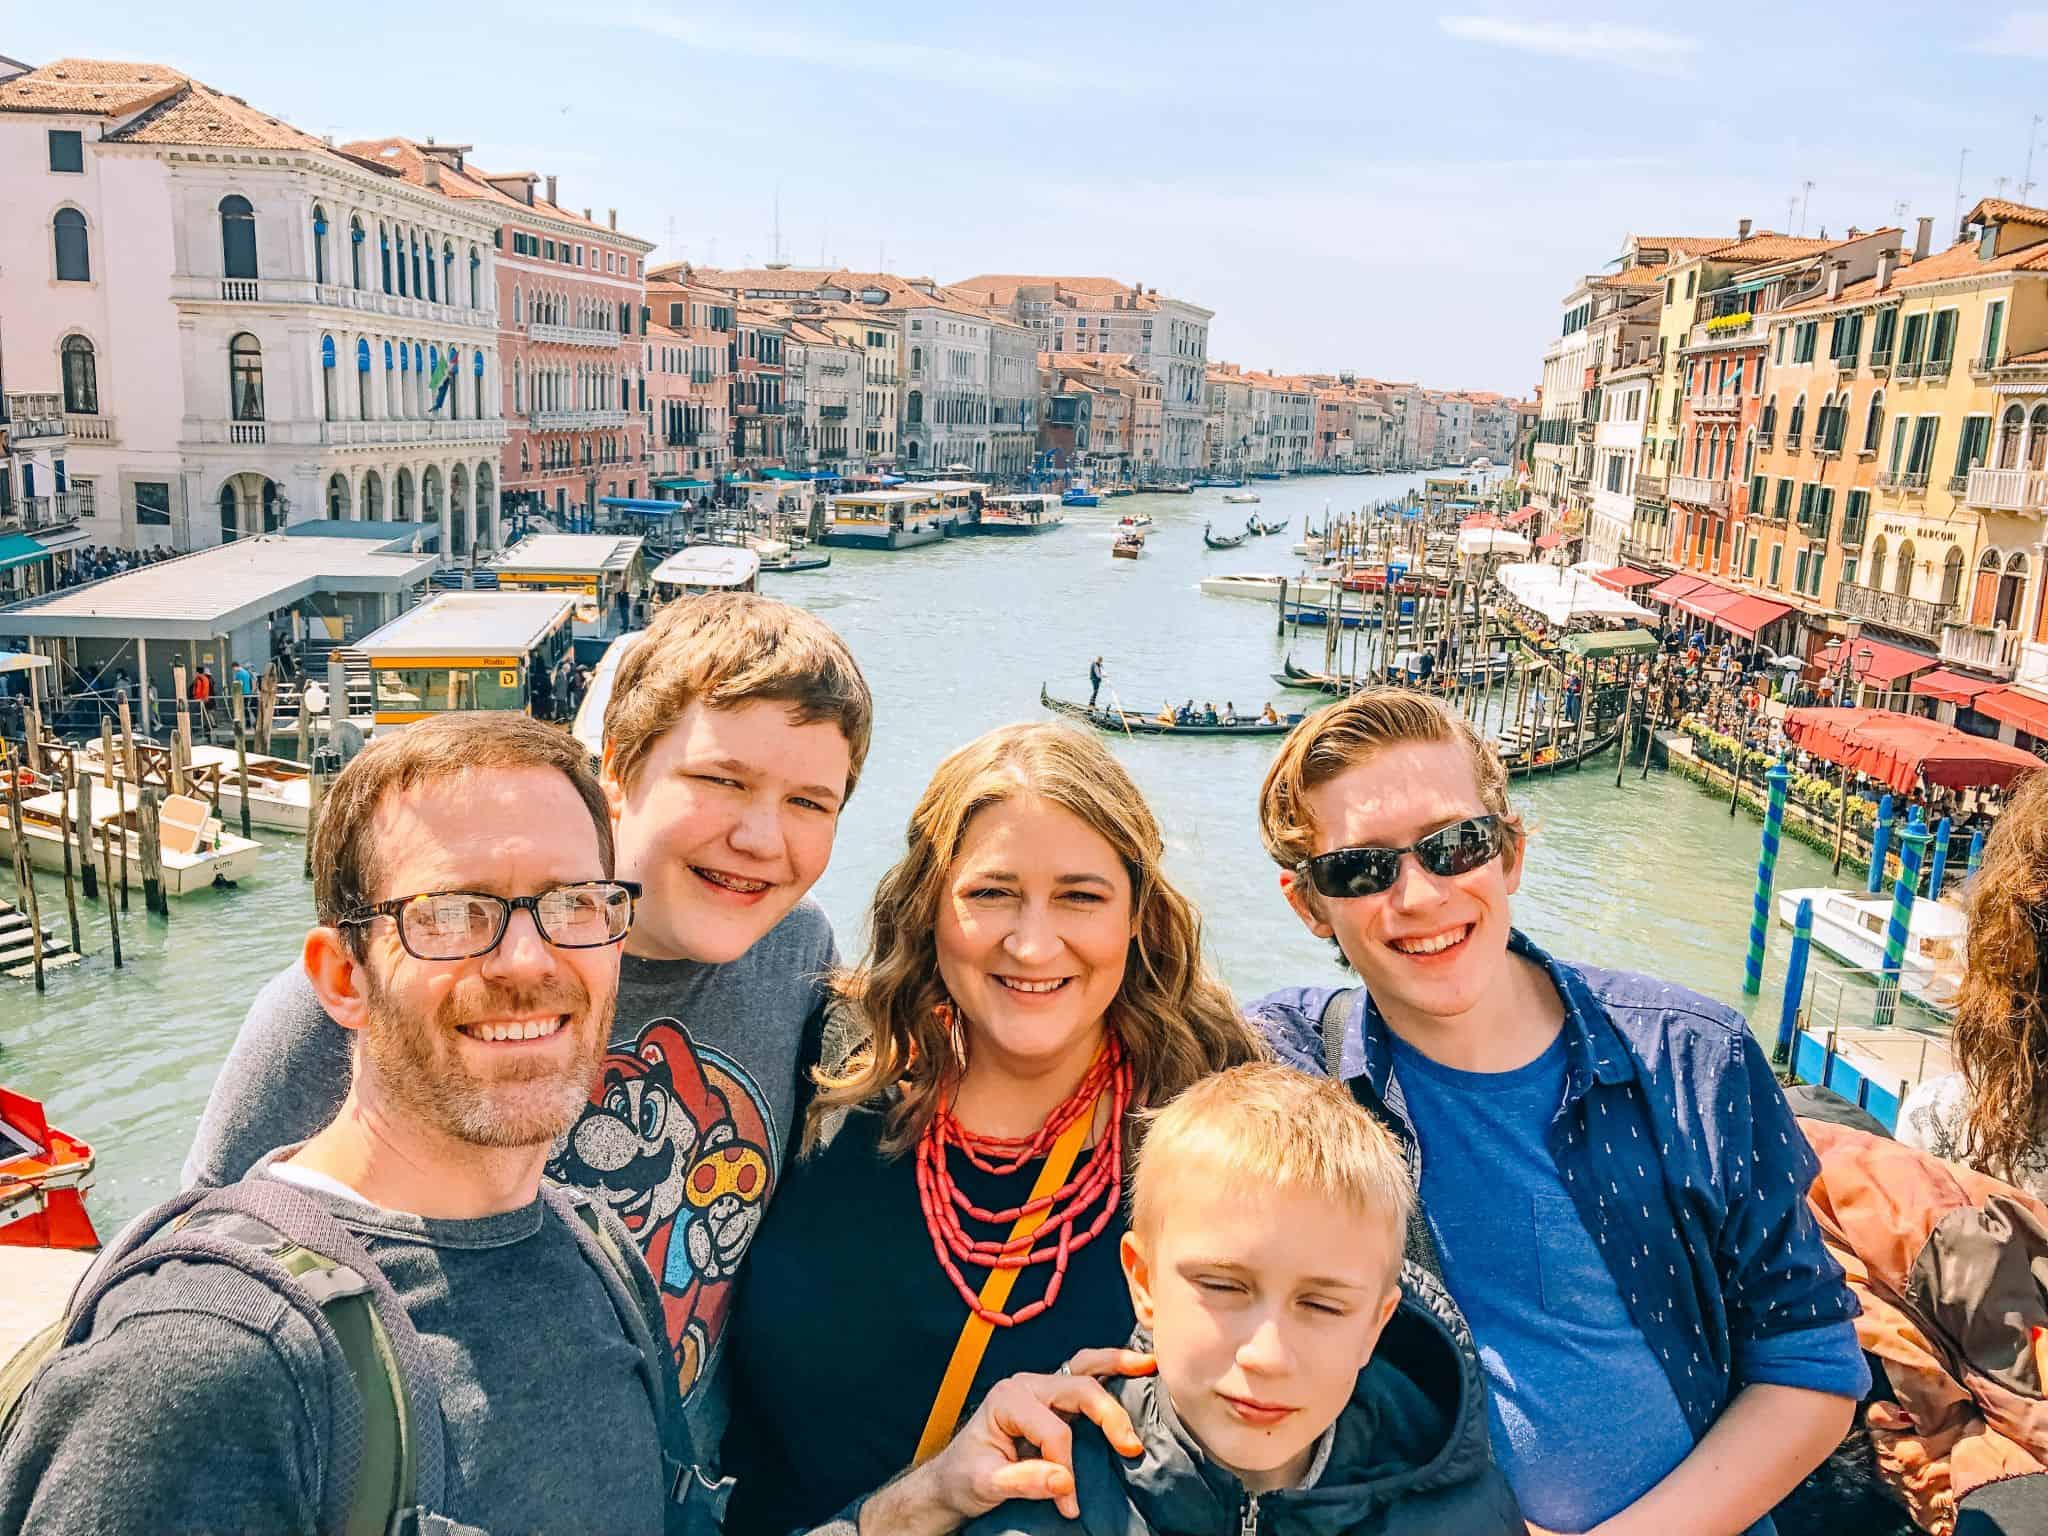 <p>Planning a family trip to Italy involves considering various expenses that can significantly impact the overall budget. The cost of traveling to Italy with family members often hinges on several factors, including the duration of the trip, the time of year, the choice of accommodation, and the intended activities.</p> <p><a href="https://travelswiththecrew.com/10-days-in-italy/">Our family of 5 went to Italy</a> in 2019 for 10 days. We visited Rome, Florence, Pompeii, Tuscany, Cinque Terre, Venice, and other small towns. We rented a car and drove, stayed in Airbnbs and generally ate out once per day. We flew for $330 round trip from New York City to Rome. <strong>The family trip to Italy cost us $6000.</strong></p>